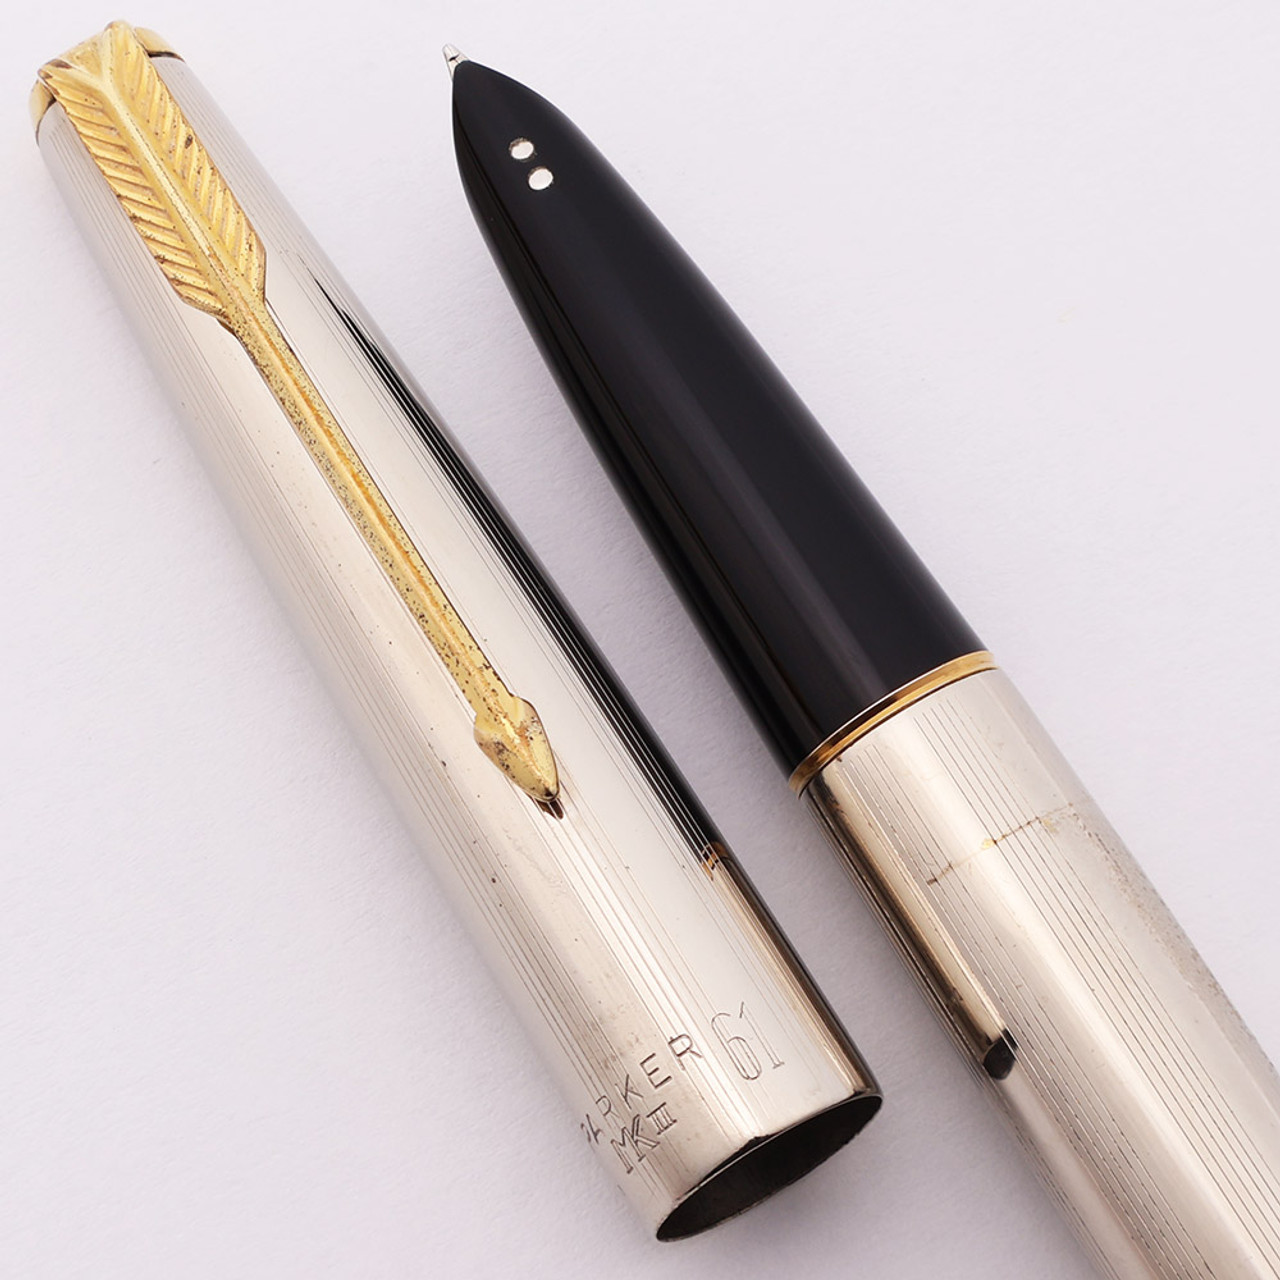 Parker 61 MKII Aerometric Fountain Pen (Argentina) - Lined Chrome, Gold Clip, Pearl Jewels, Fine Steel Nib (Very Nice, Works Well)